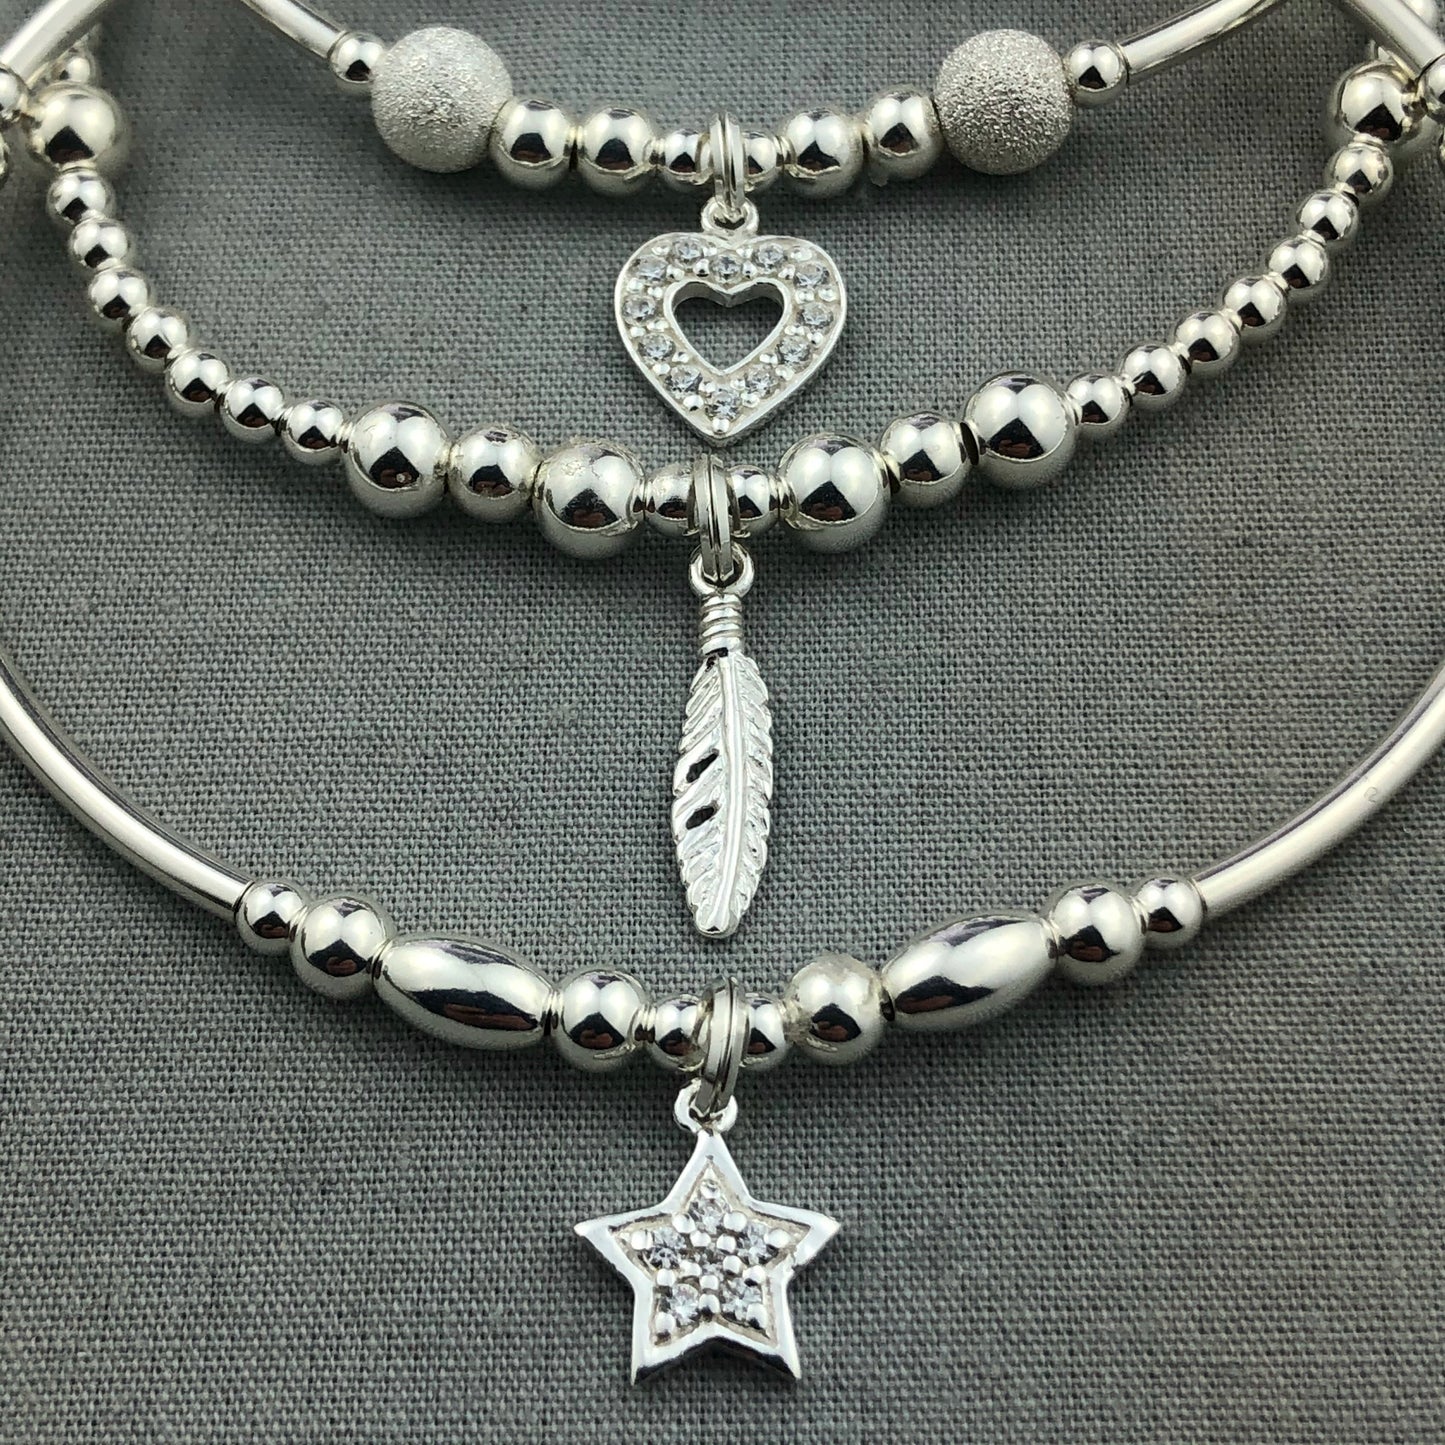 "Wish come true" Women's Sterling Silver Stacking Charm Bracelet Set by My Silver Wish